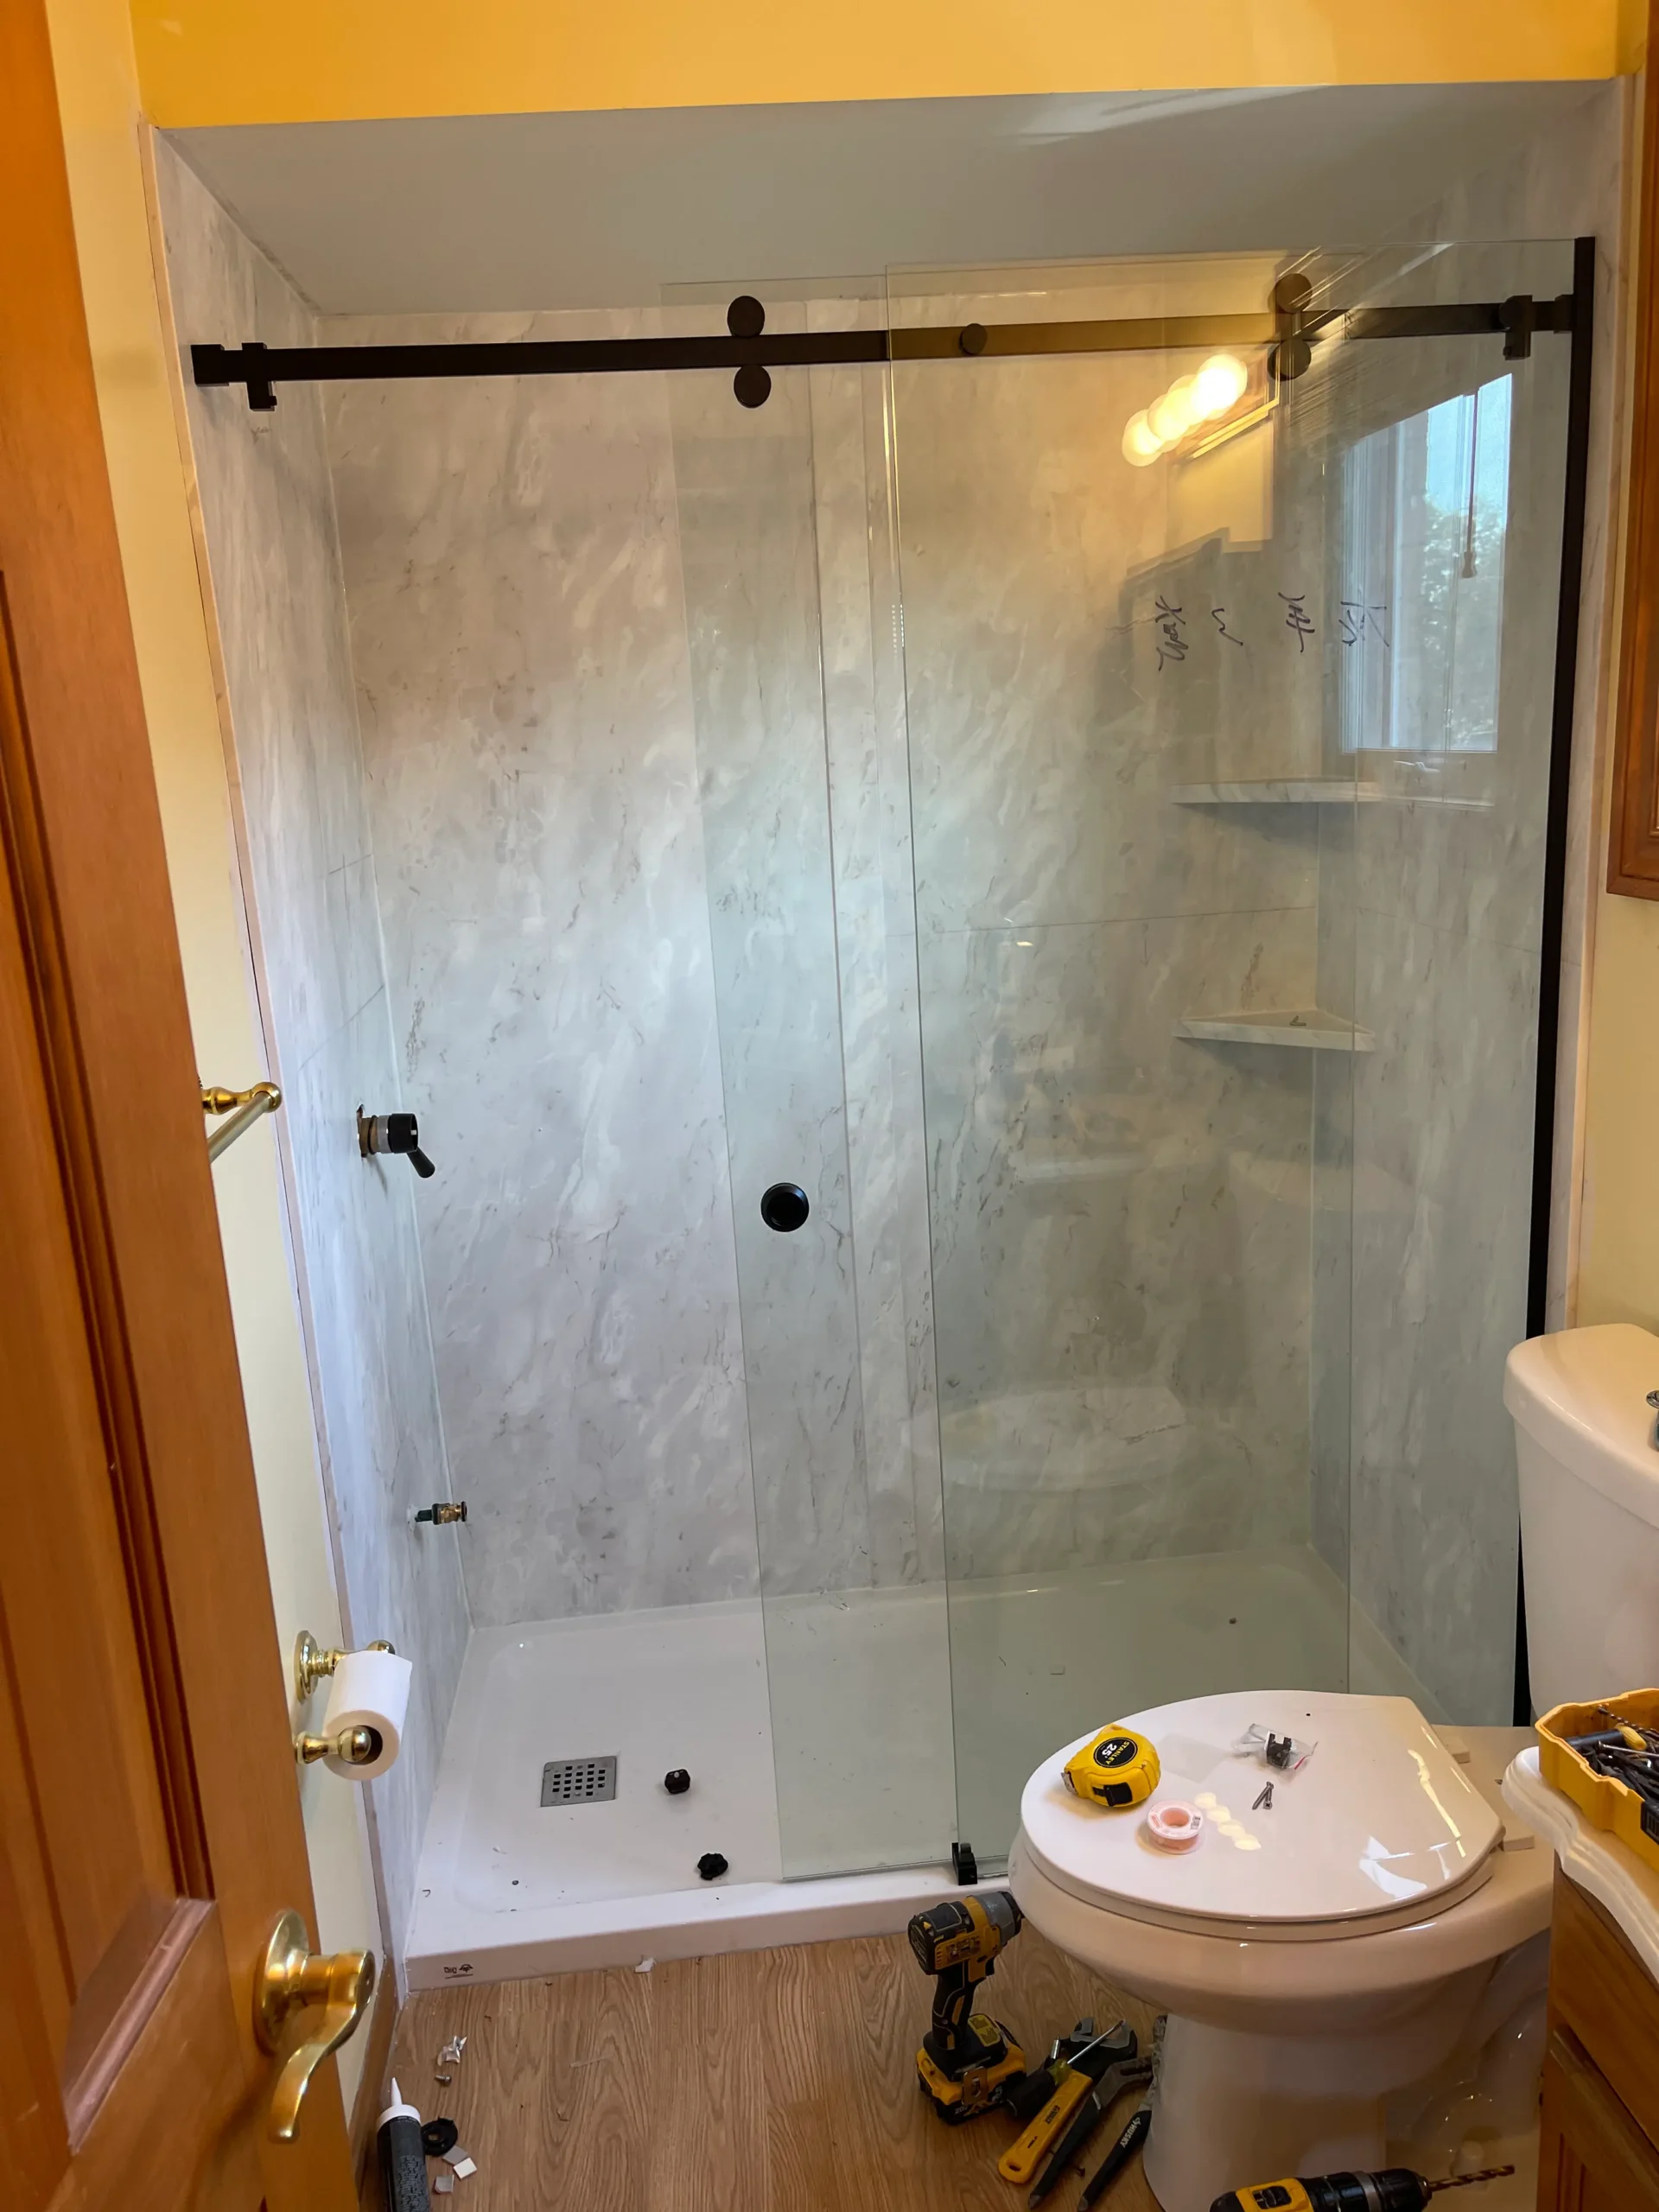 an image about A bathroom with a glass shower door and Acrylic Panels on the walls.